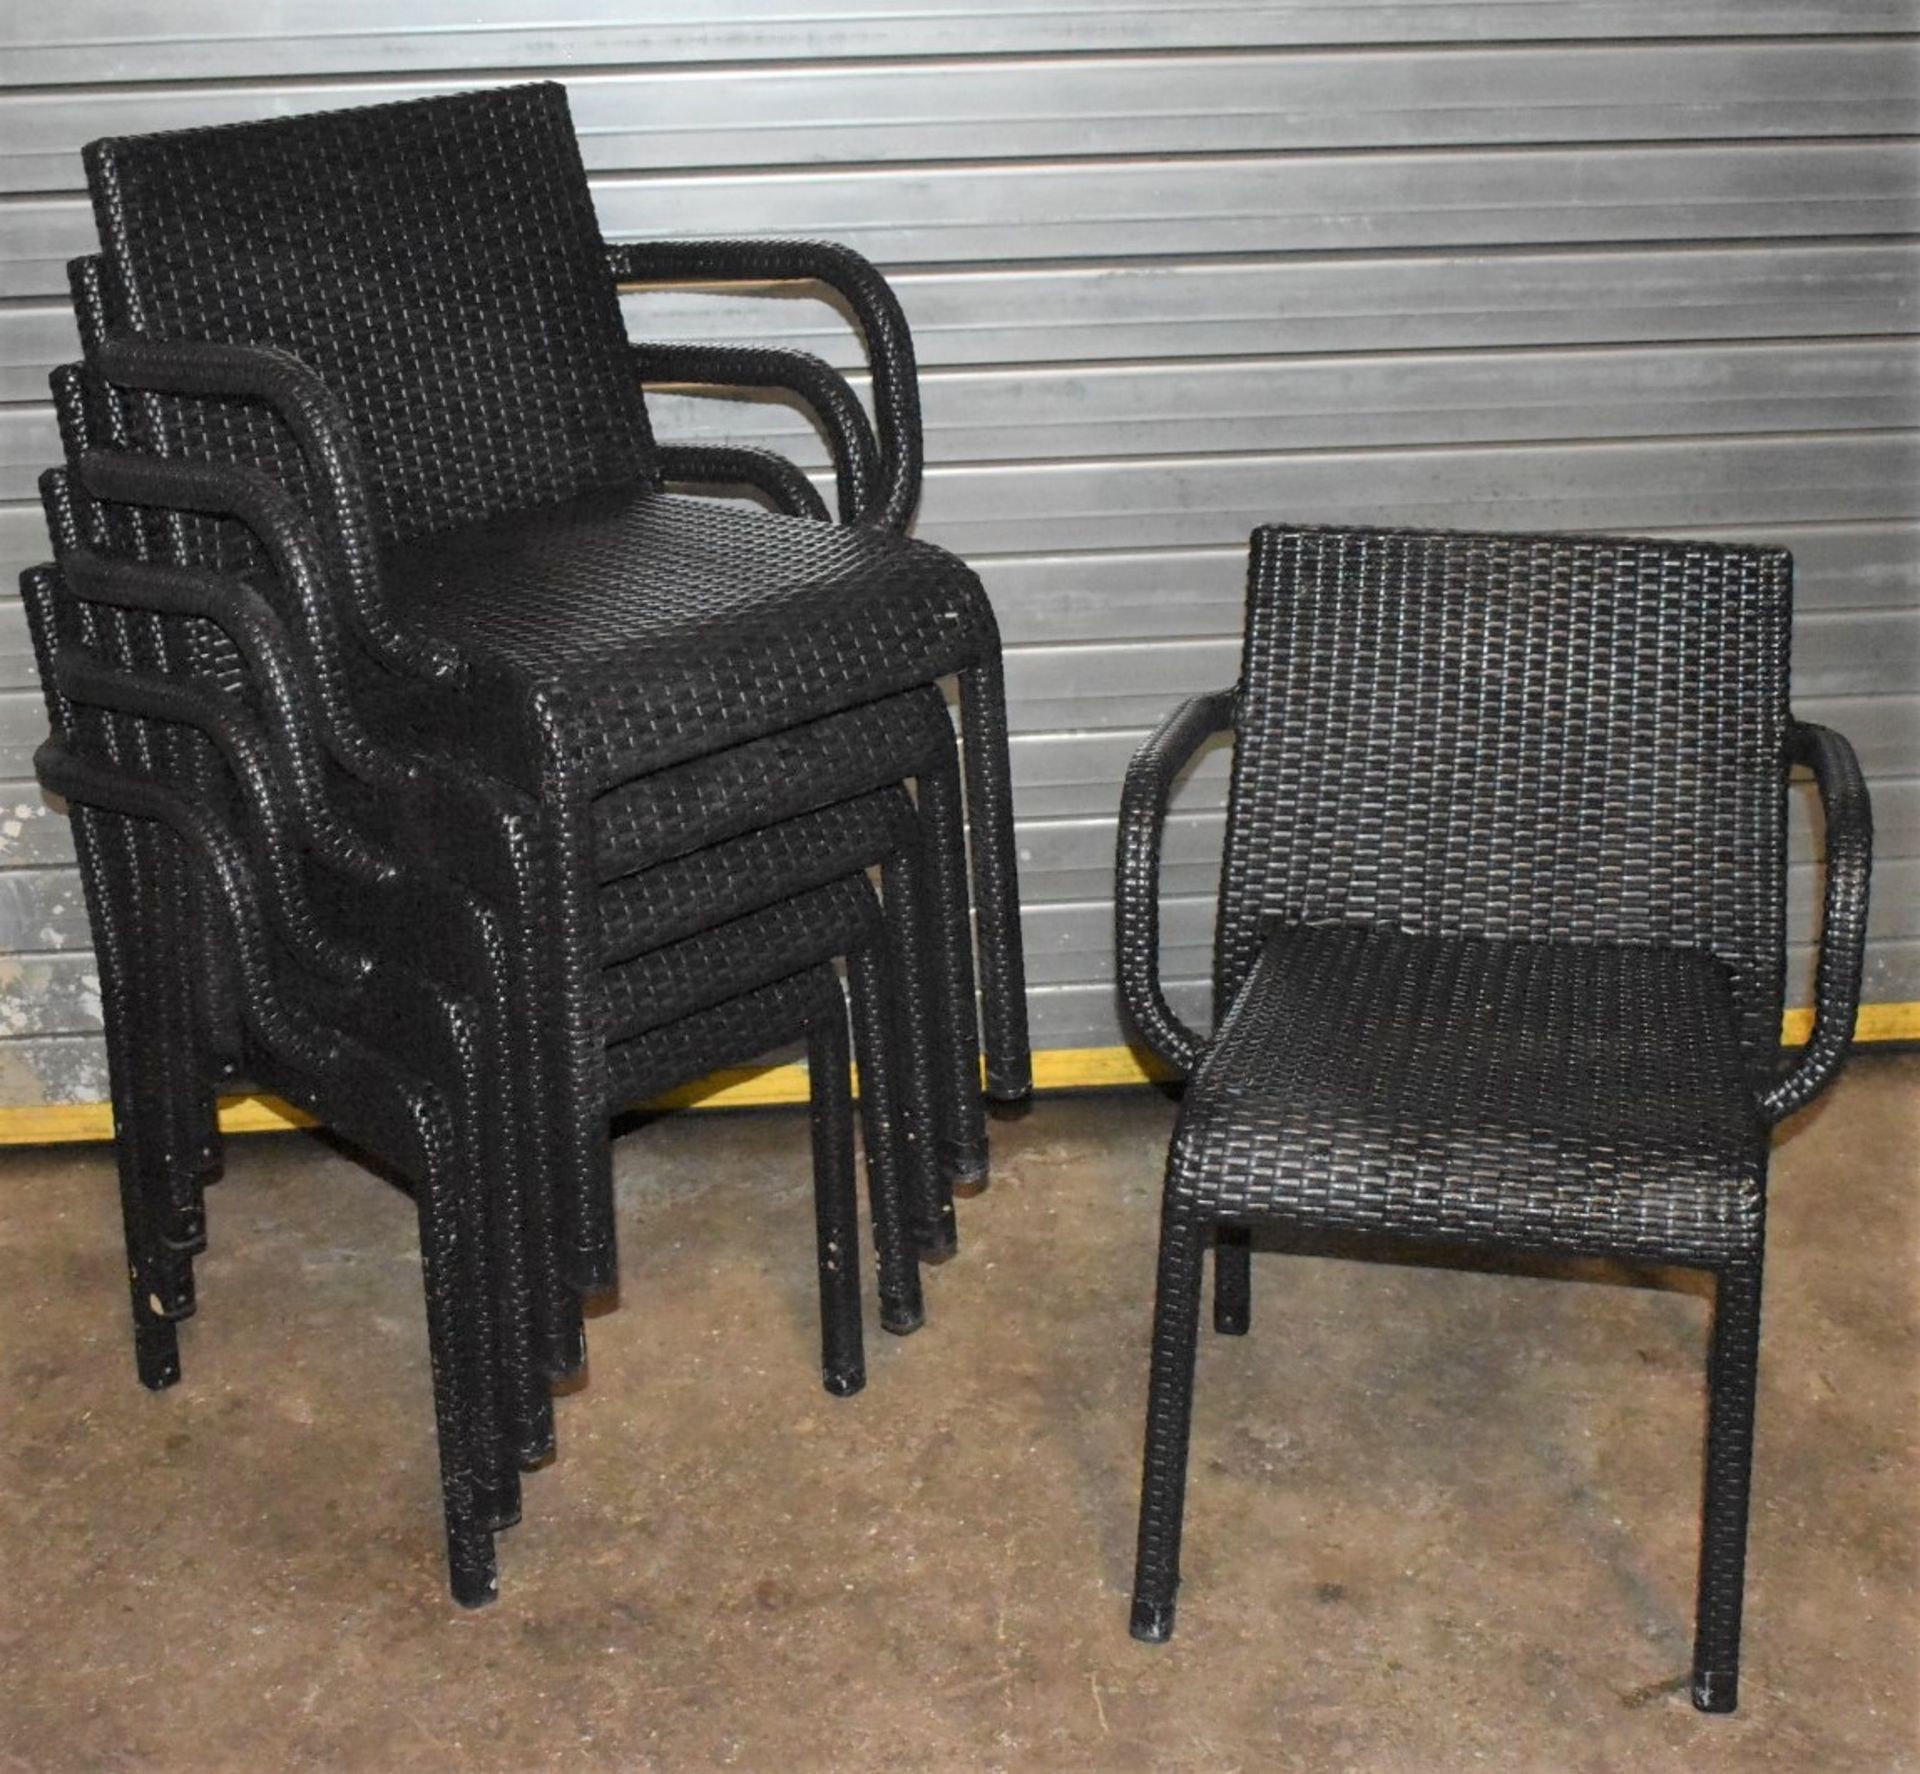 6 x Outdoor Stackable Rattan Chairs With Arm Rests - CL999 - Ref WH5 - Provided in Very Good - Image 7 of 9